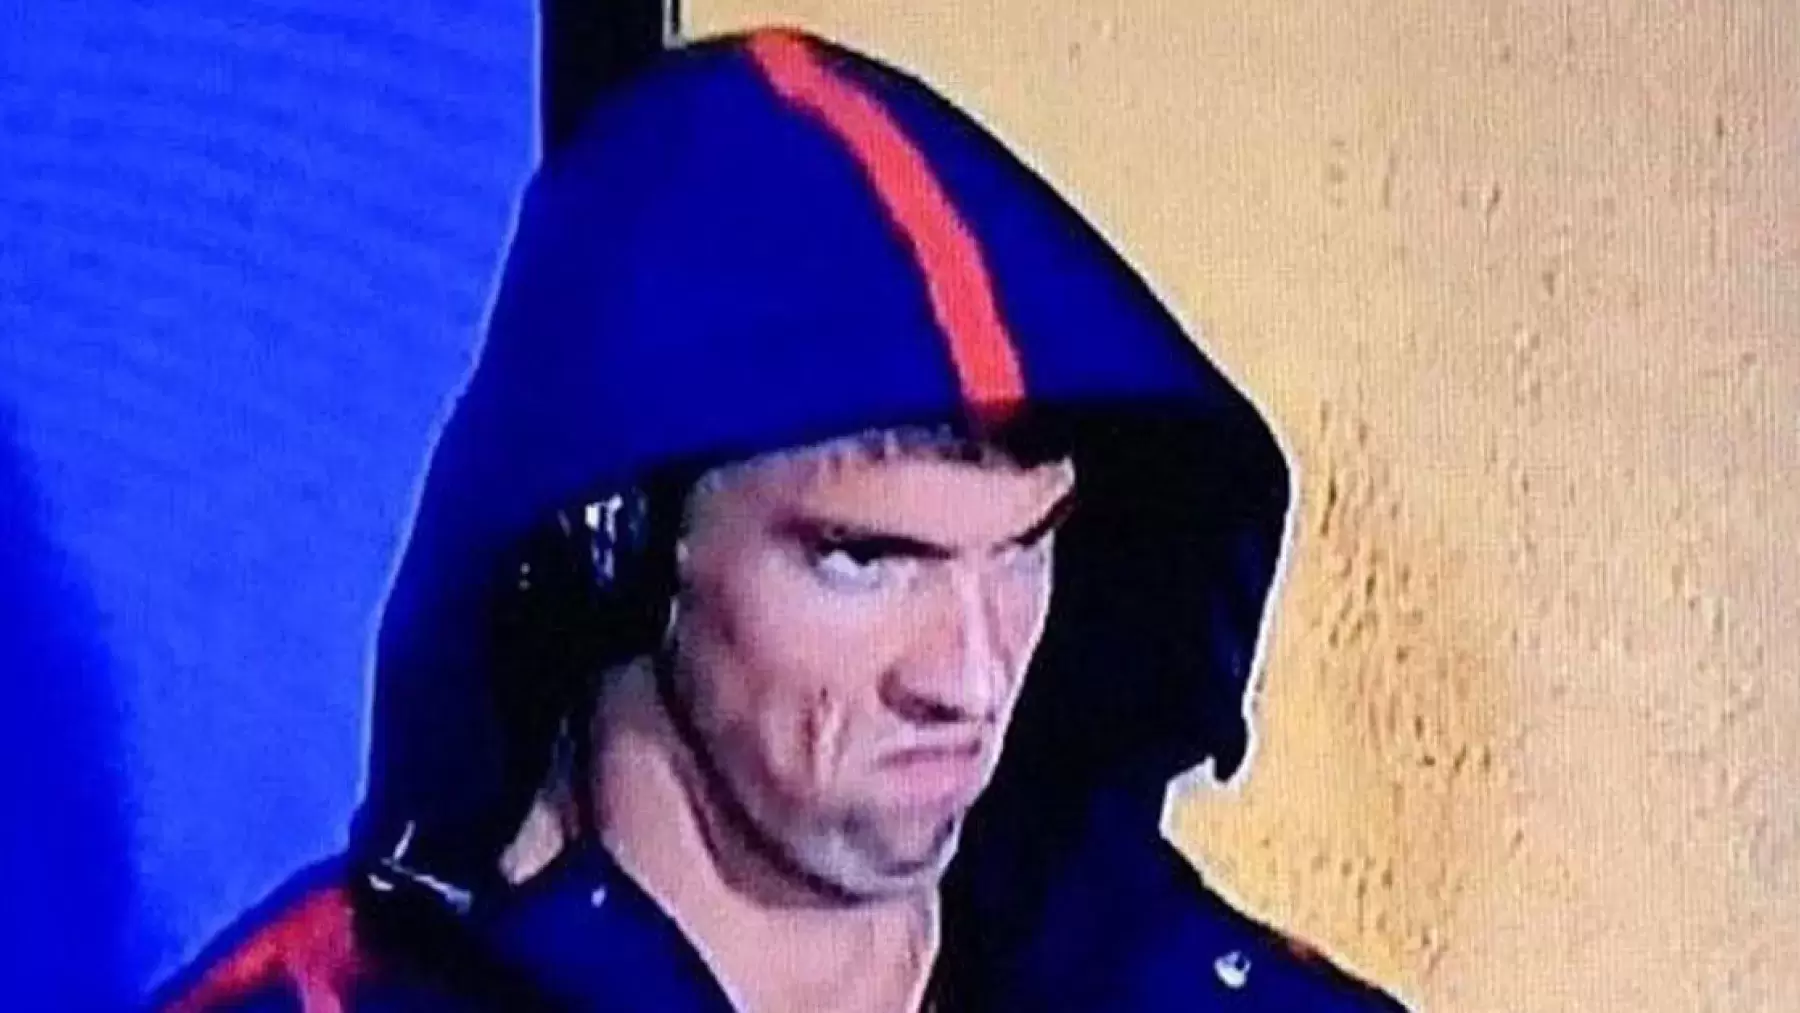 phelps with angry face